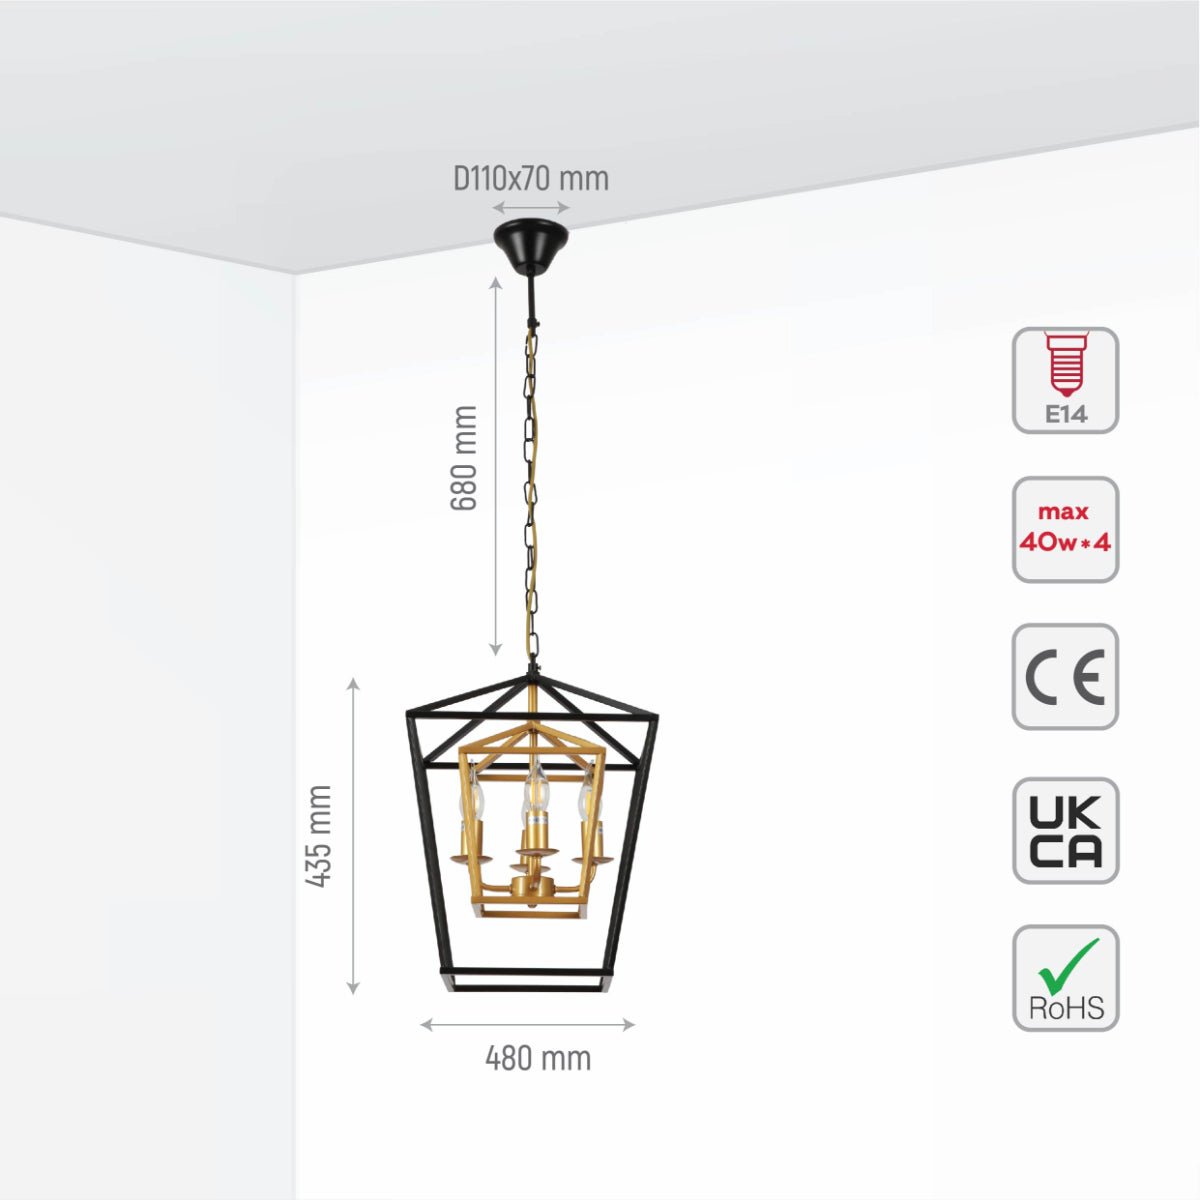 Size and specs of Black and Gold Candle Farmhouse Vintage Pendant Ceiling Light with 4xE27 Fitting | TEKLED 159-17450